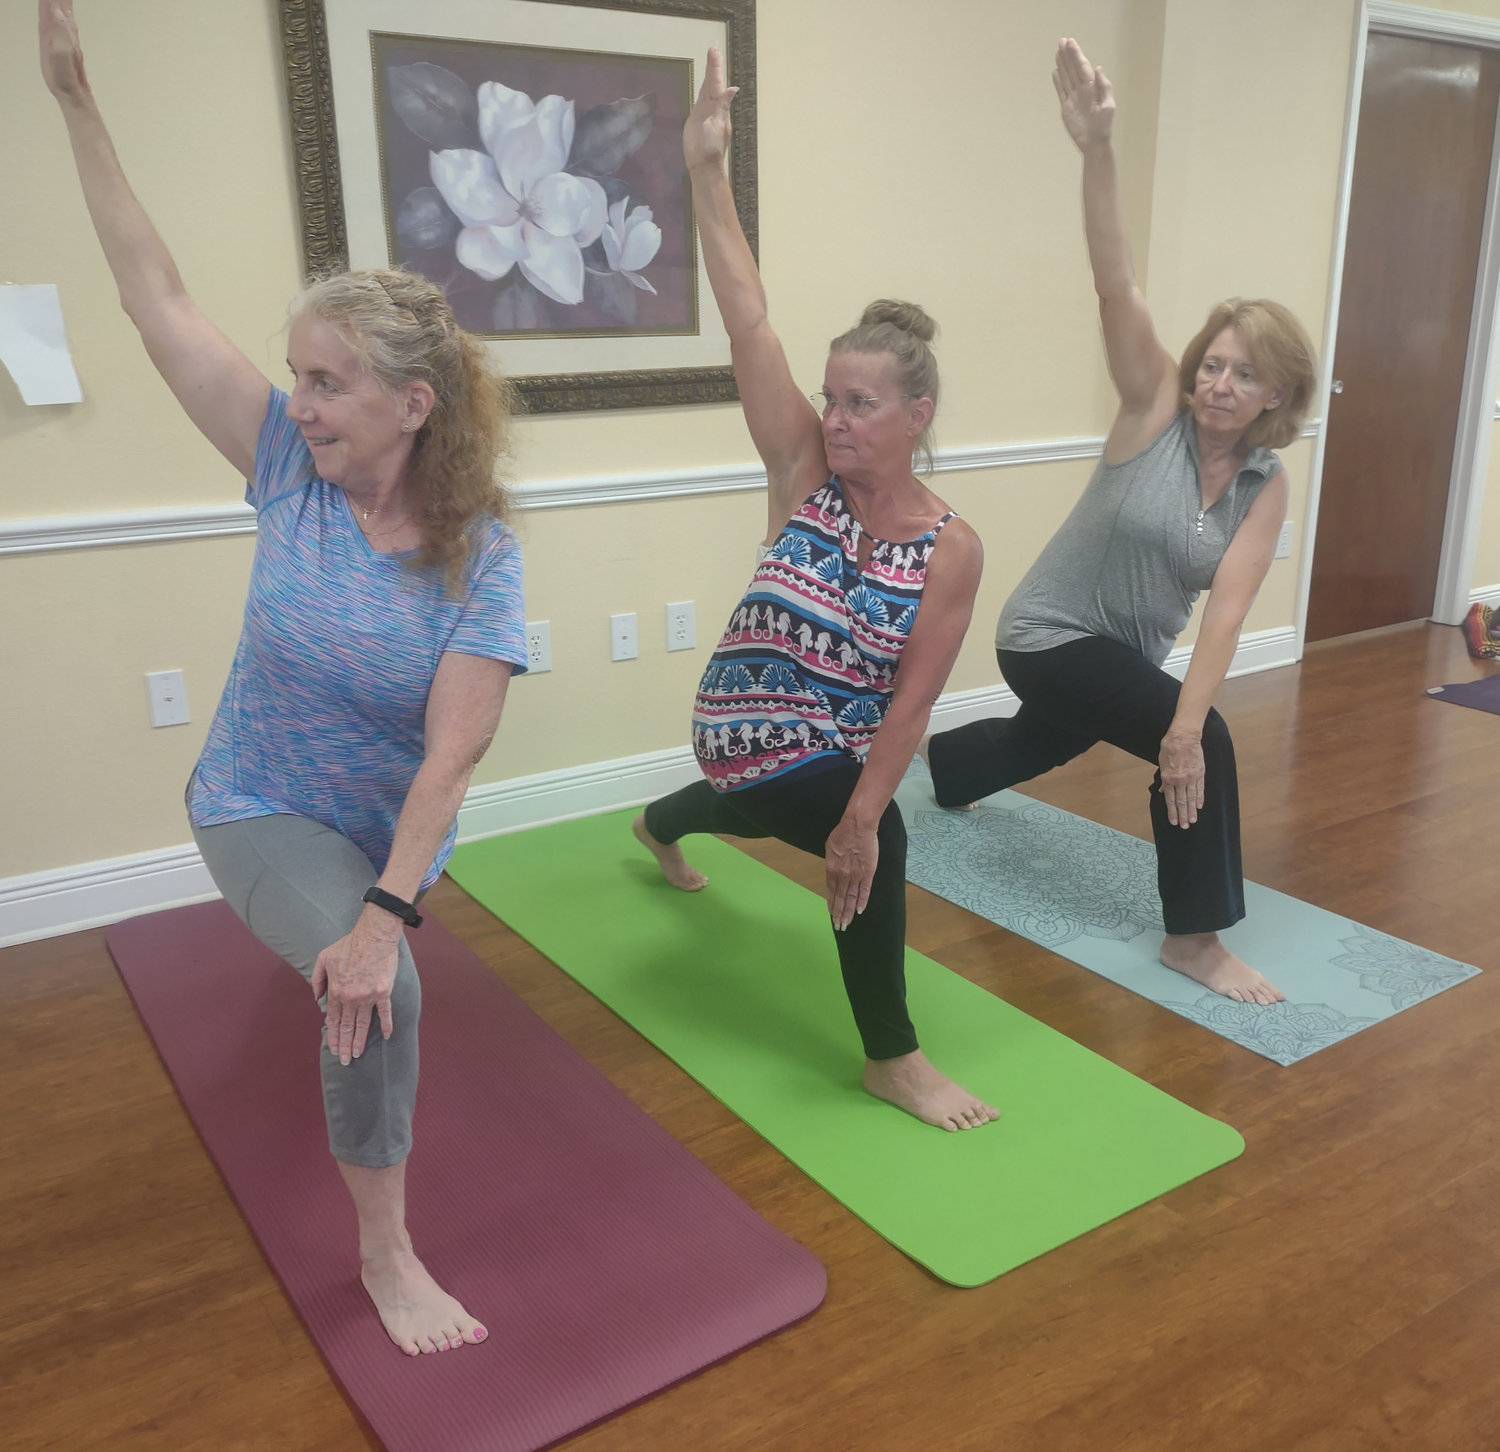 Practicing the windmill lunge are (left to right) Joyce Shafer, Tamara Shafer and Cindy Edgar.